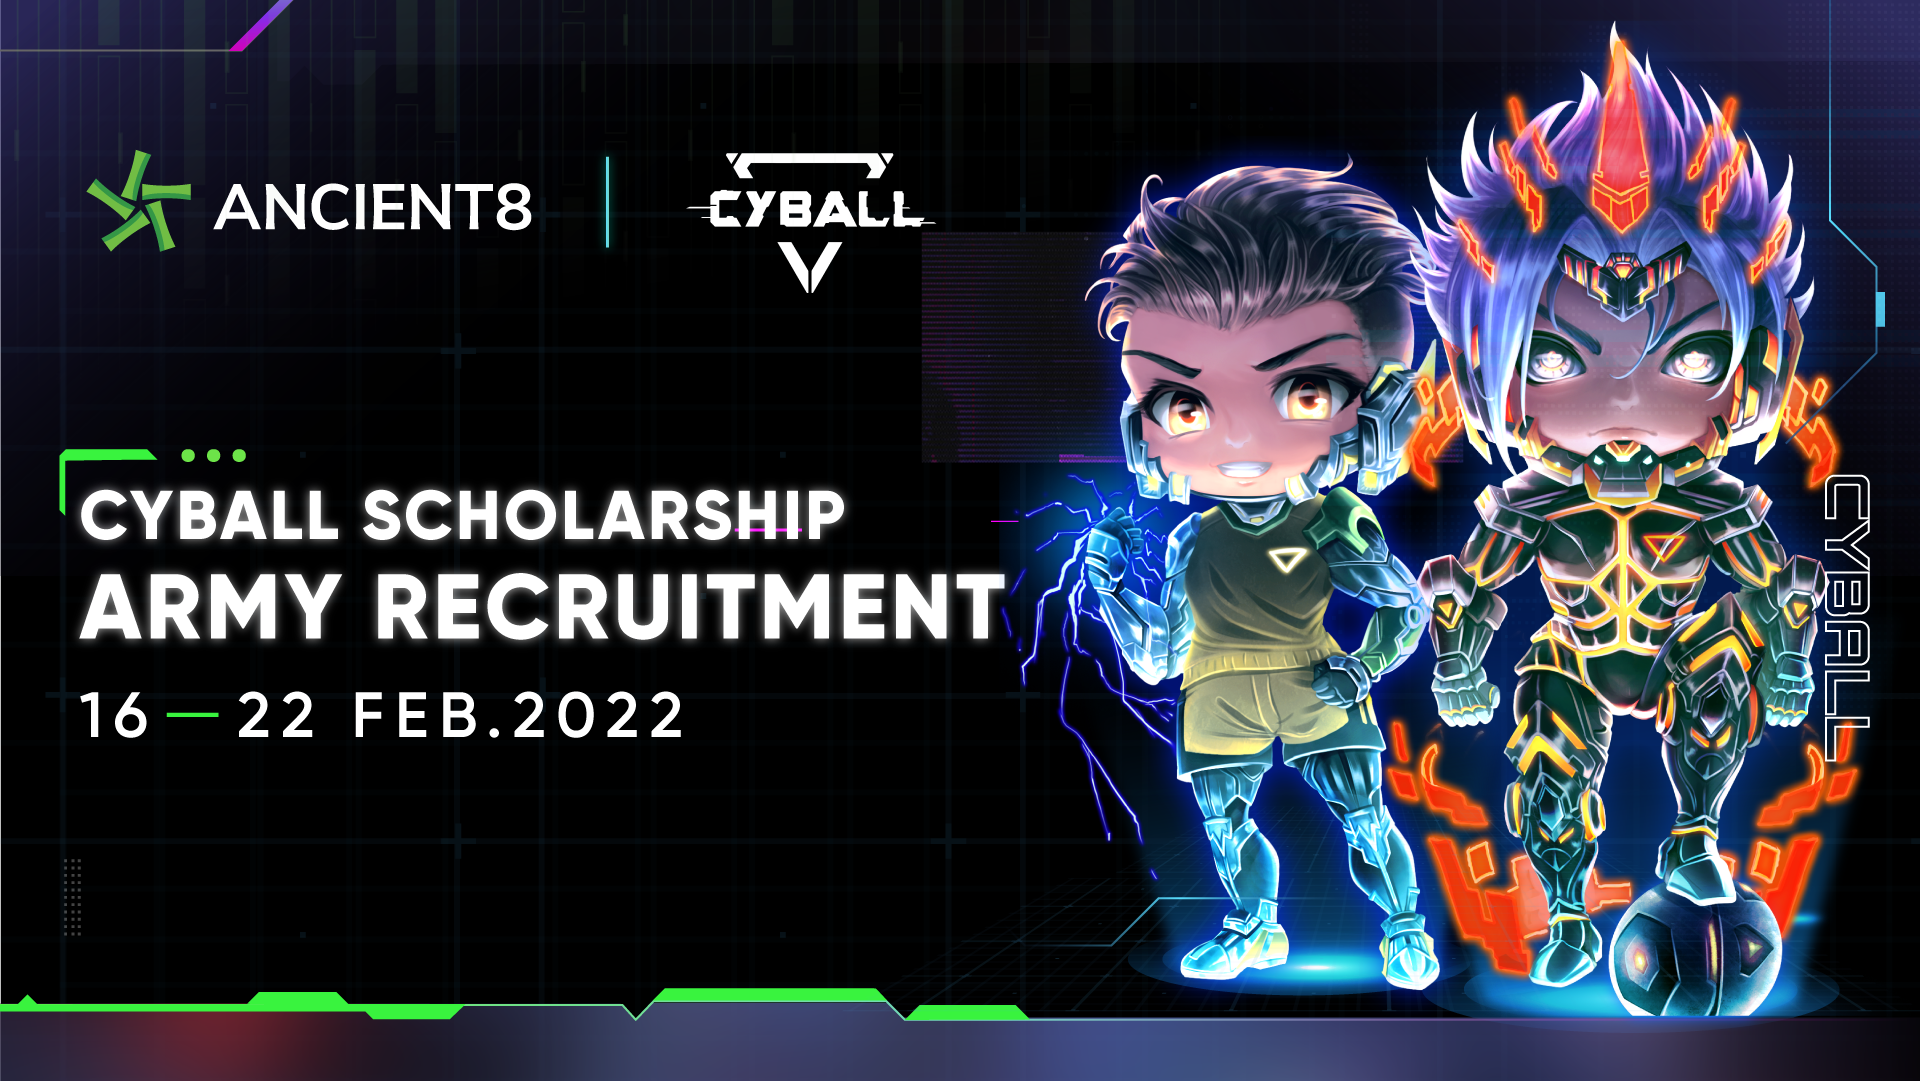 Ancient8 CyBall Scholarship Army Recruitment - Start Your GameFi Journey with Ancient8